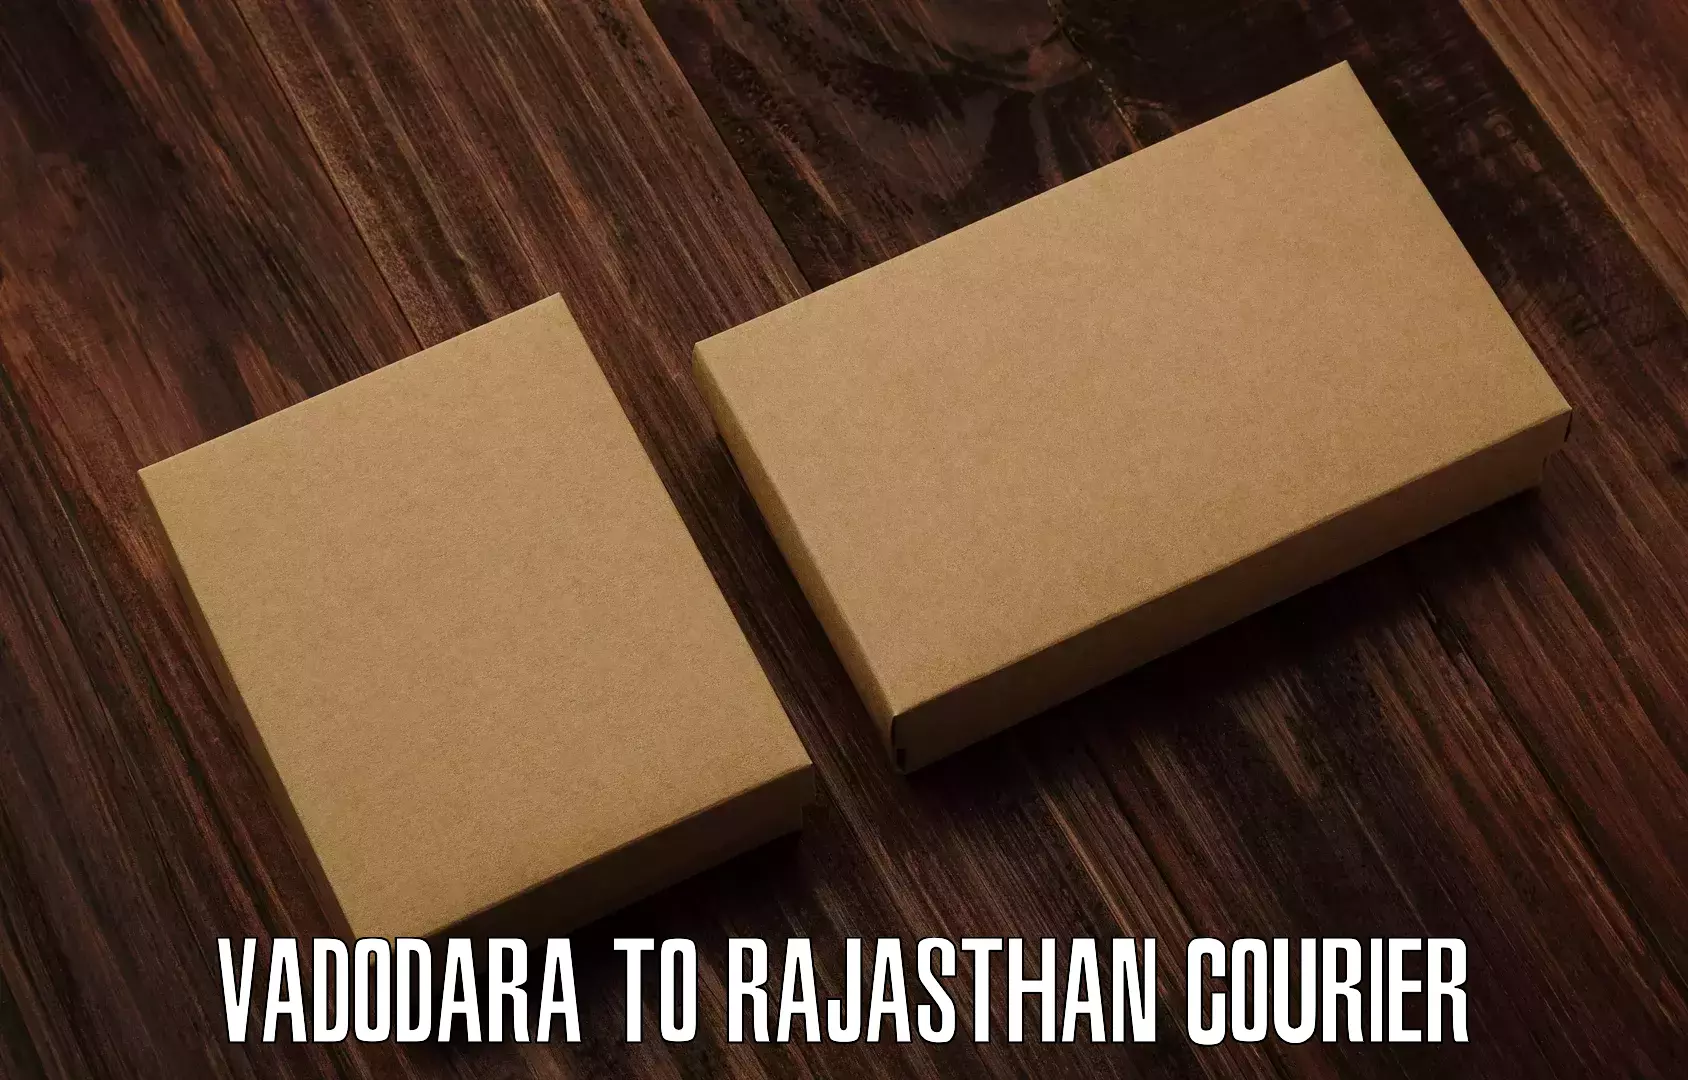 State-of-the-art courier technology Vadodara to Bari Dholpur